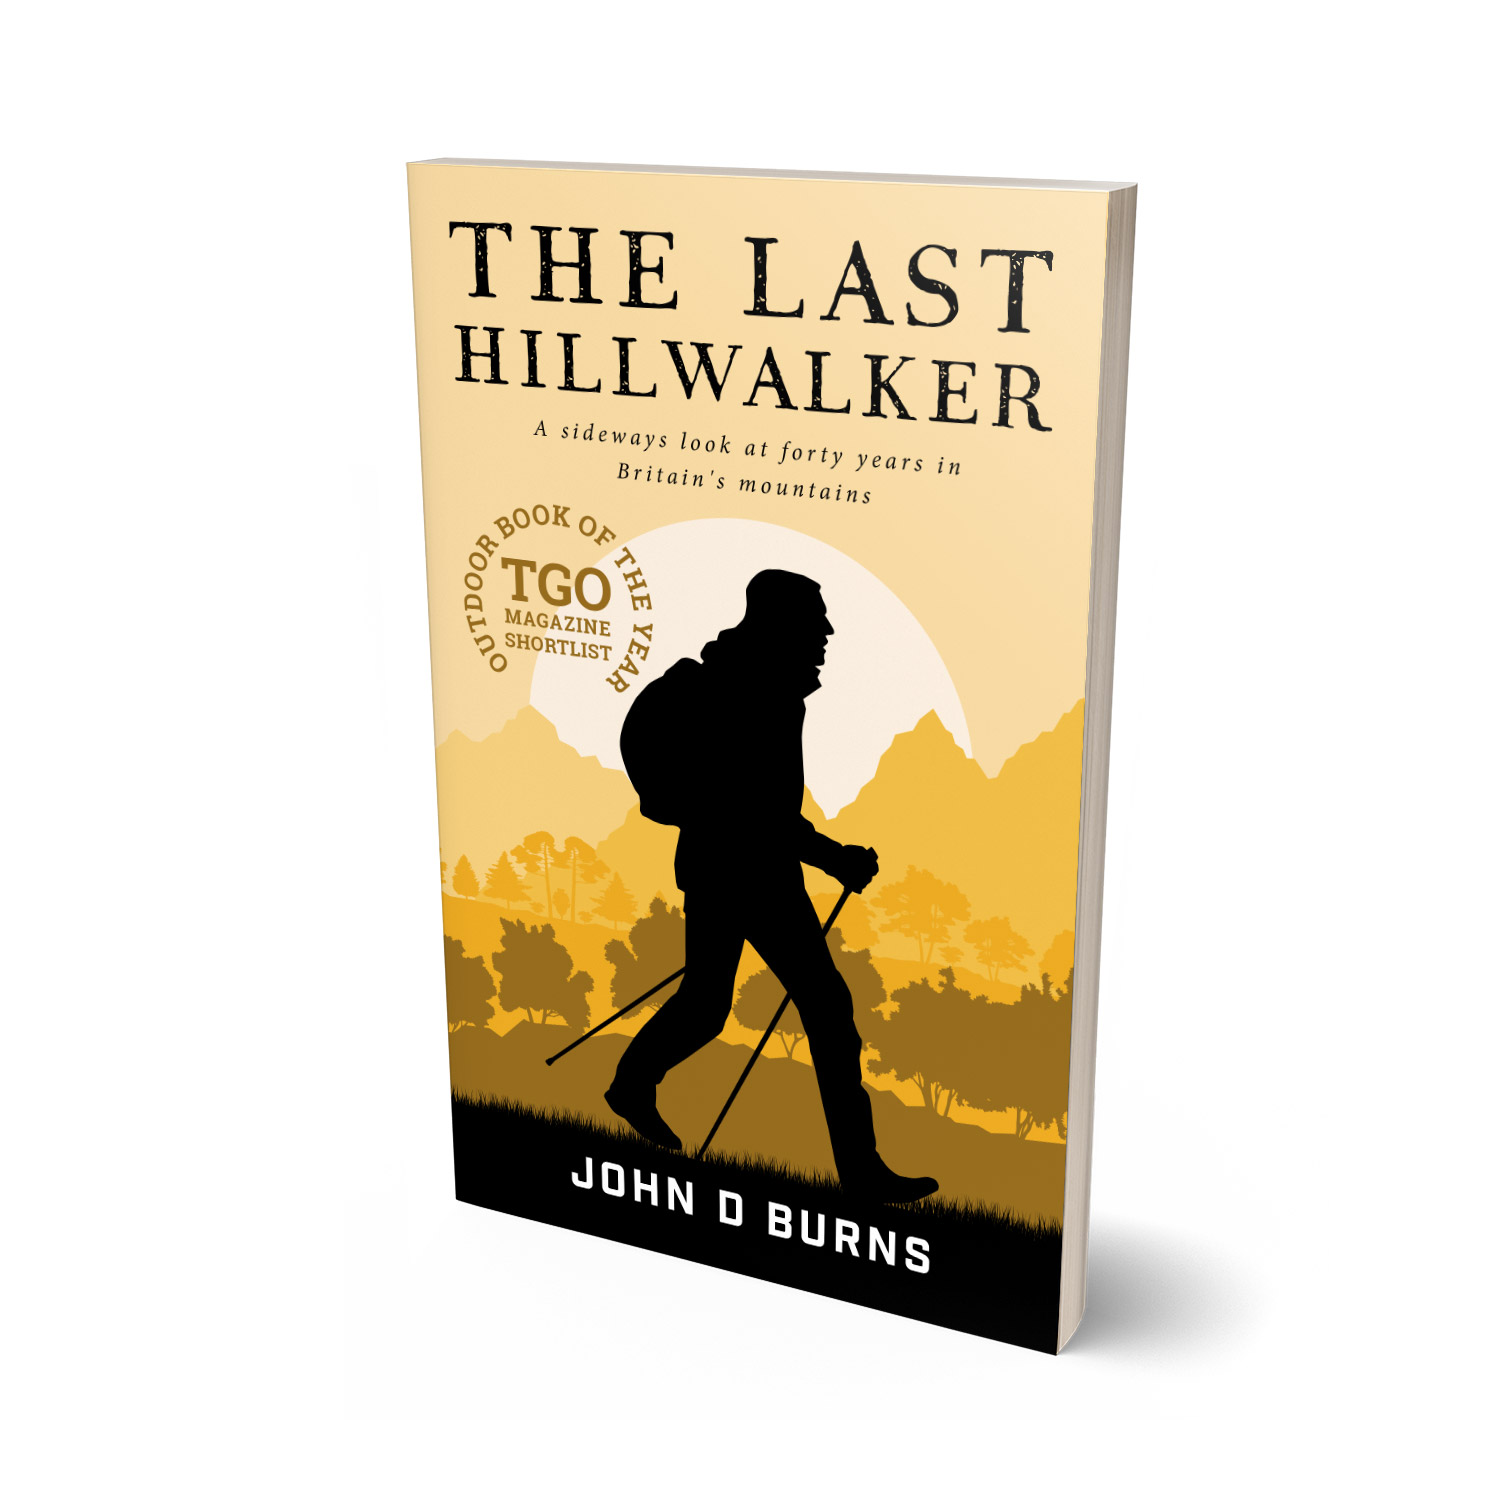 'The Last Hillwalker' is an excellent, funny and moving memoir about walking Britain's hills and mountains, by author John D Burns. The book cover and interior were designed by Mark Thomas, of coverness.com. To find out more about my book design services, please visit www.coverness.com.